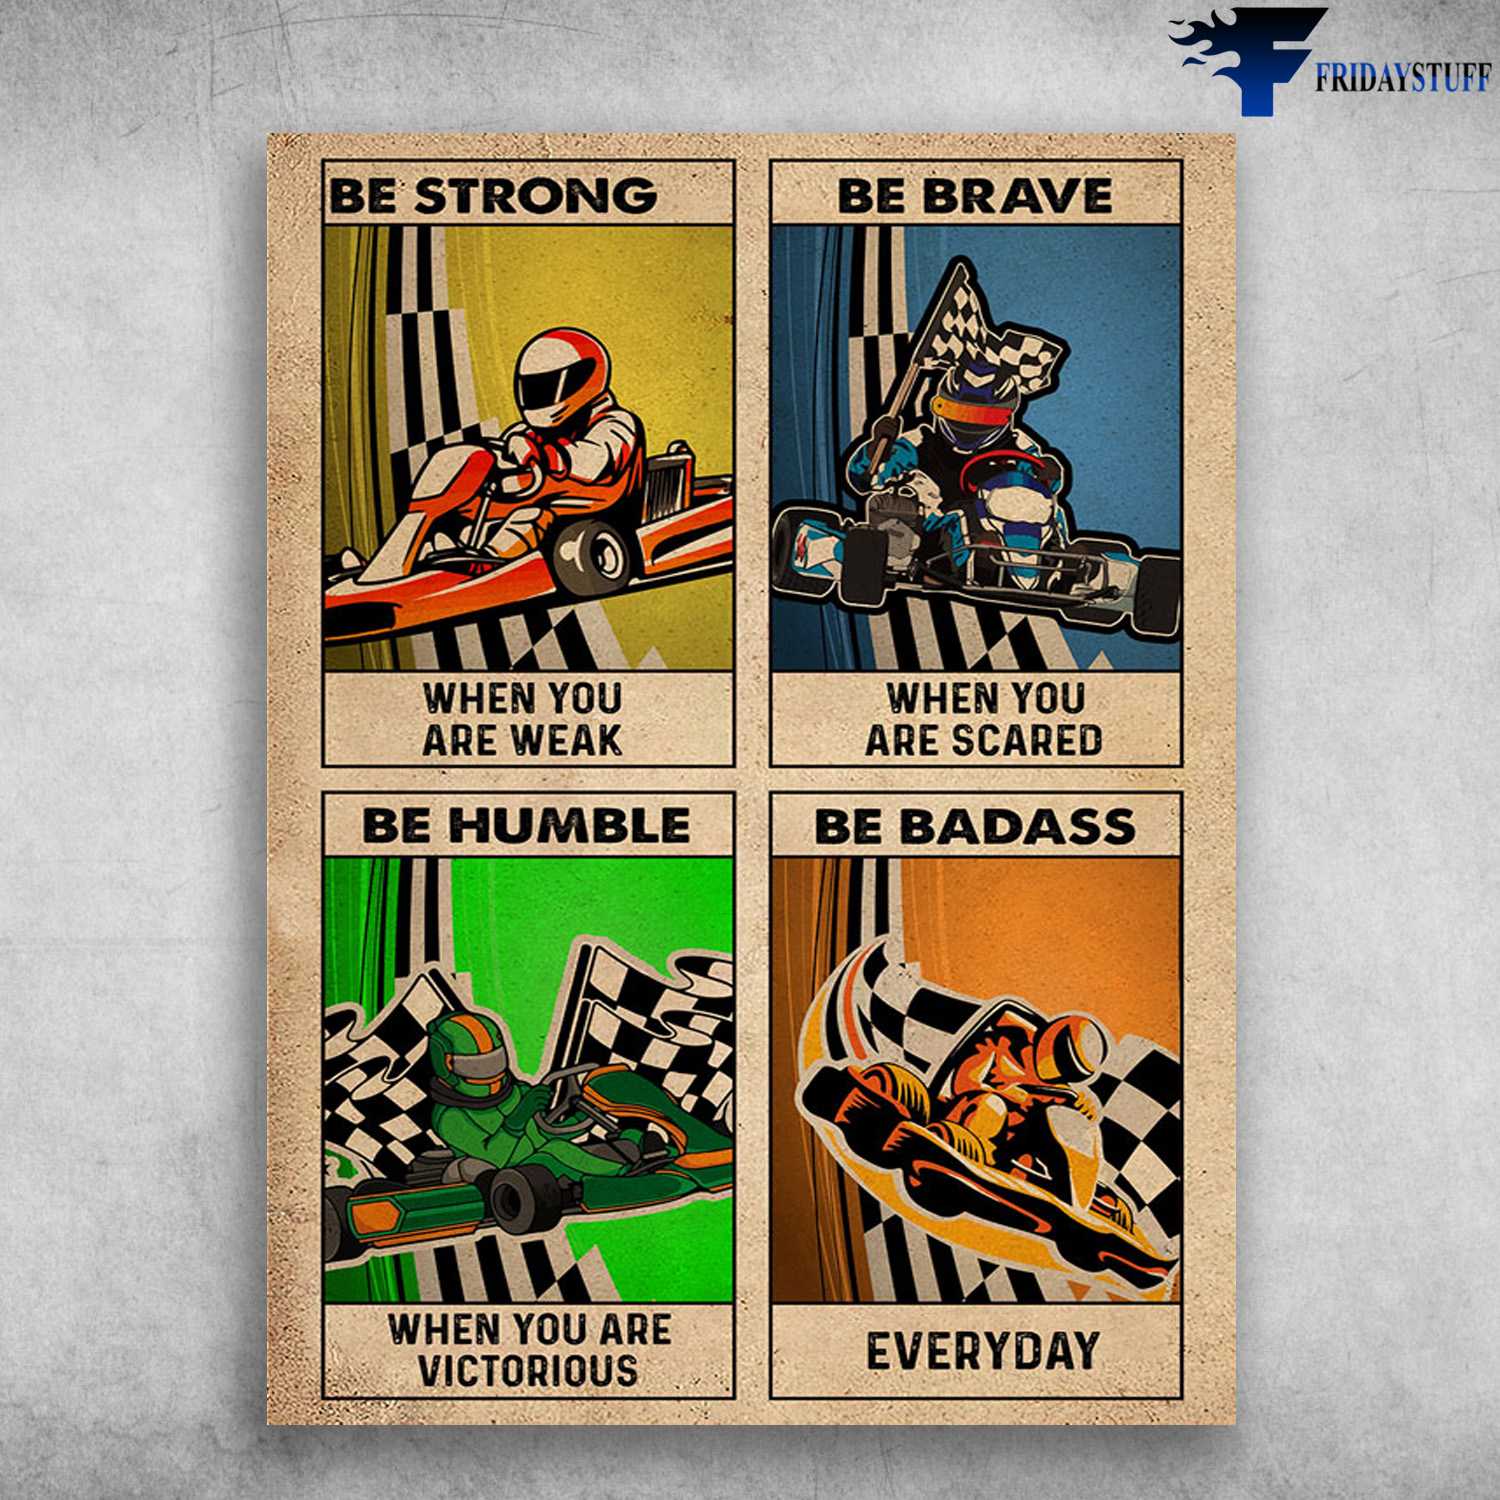 Speed Lover, Formula 1 Racing - Be Strong When You Are Weak, Be Brave When You Are Scared, Be Humble When You Are Victorious, Be Badass Everyday